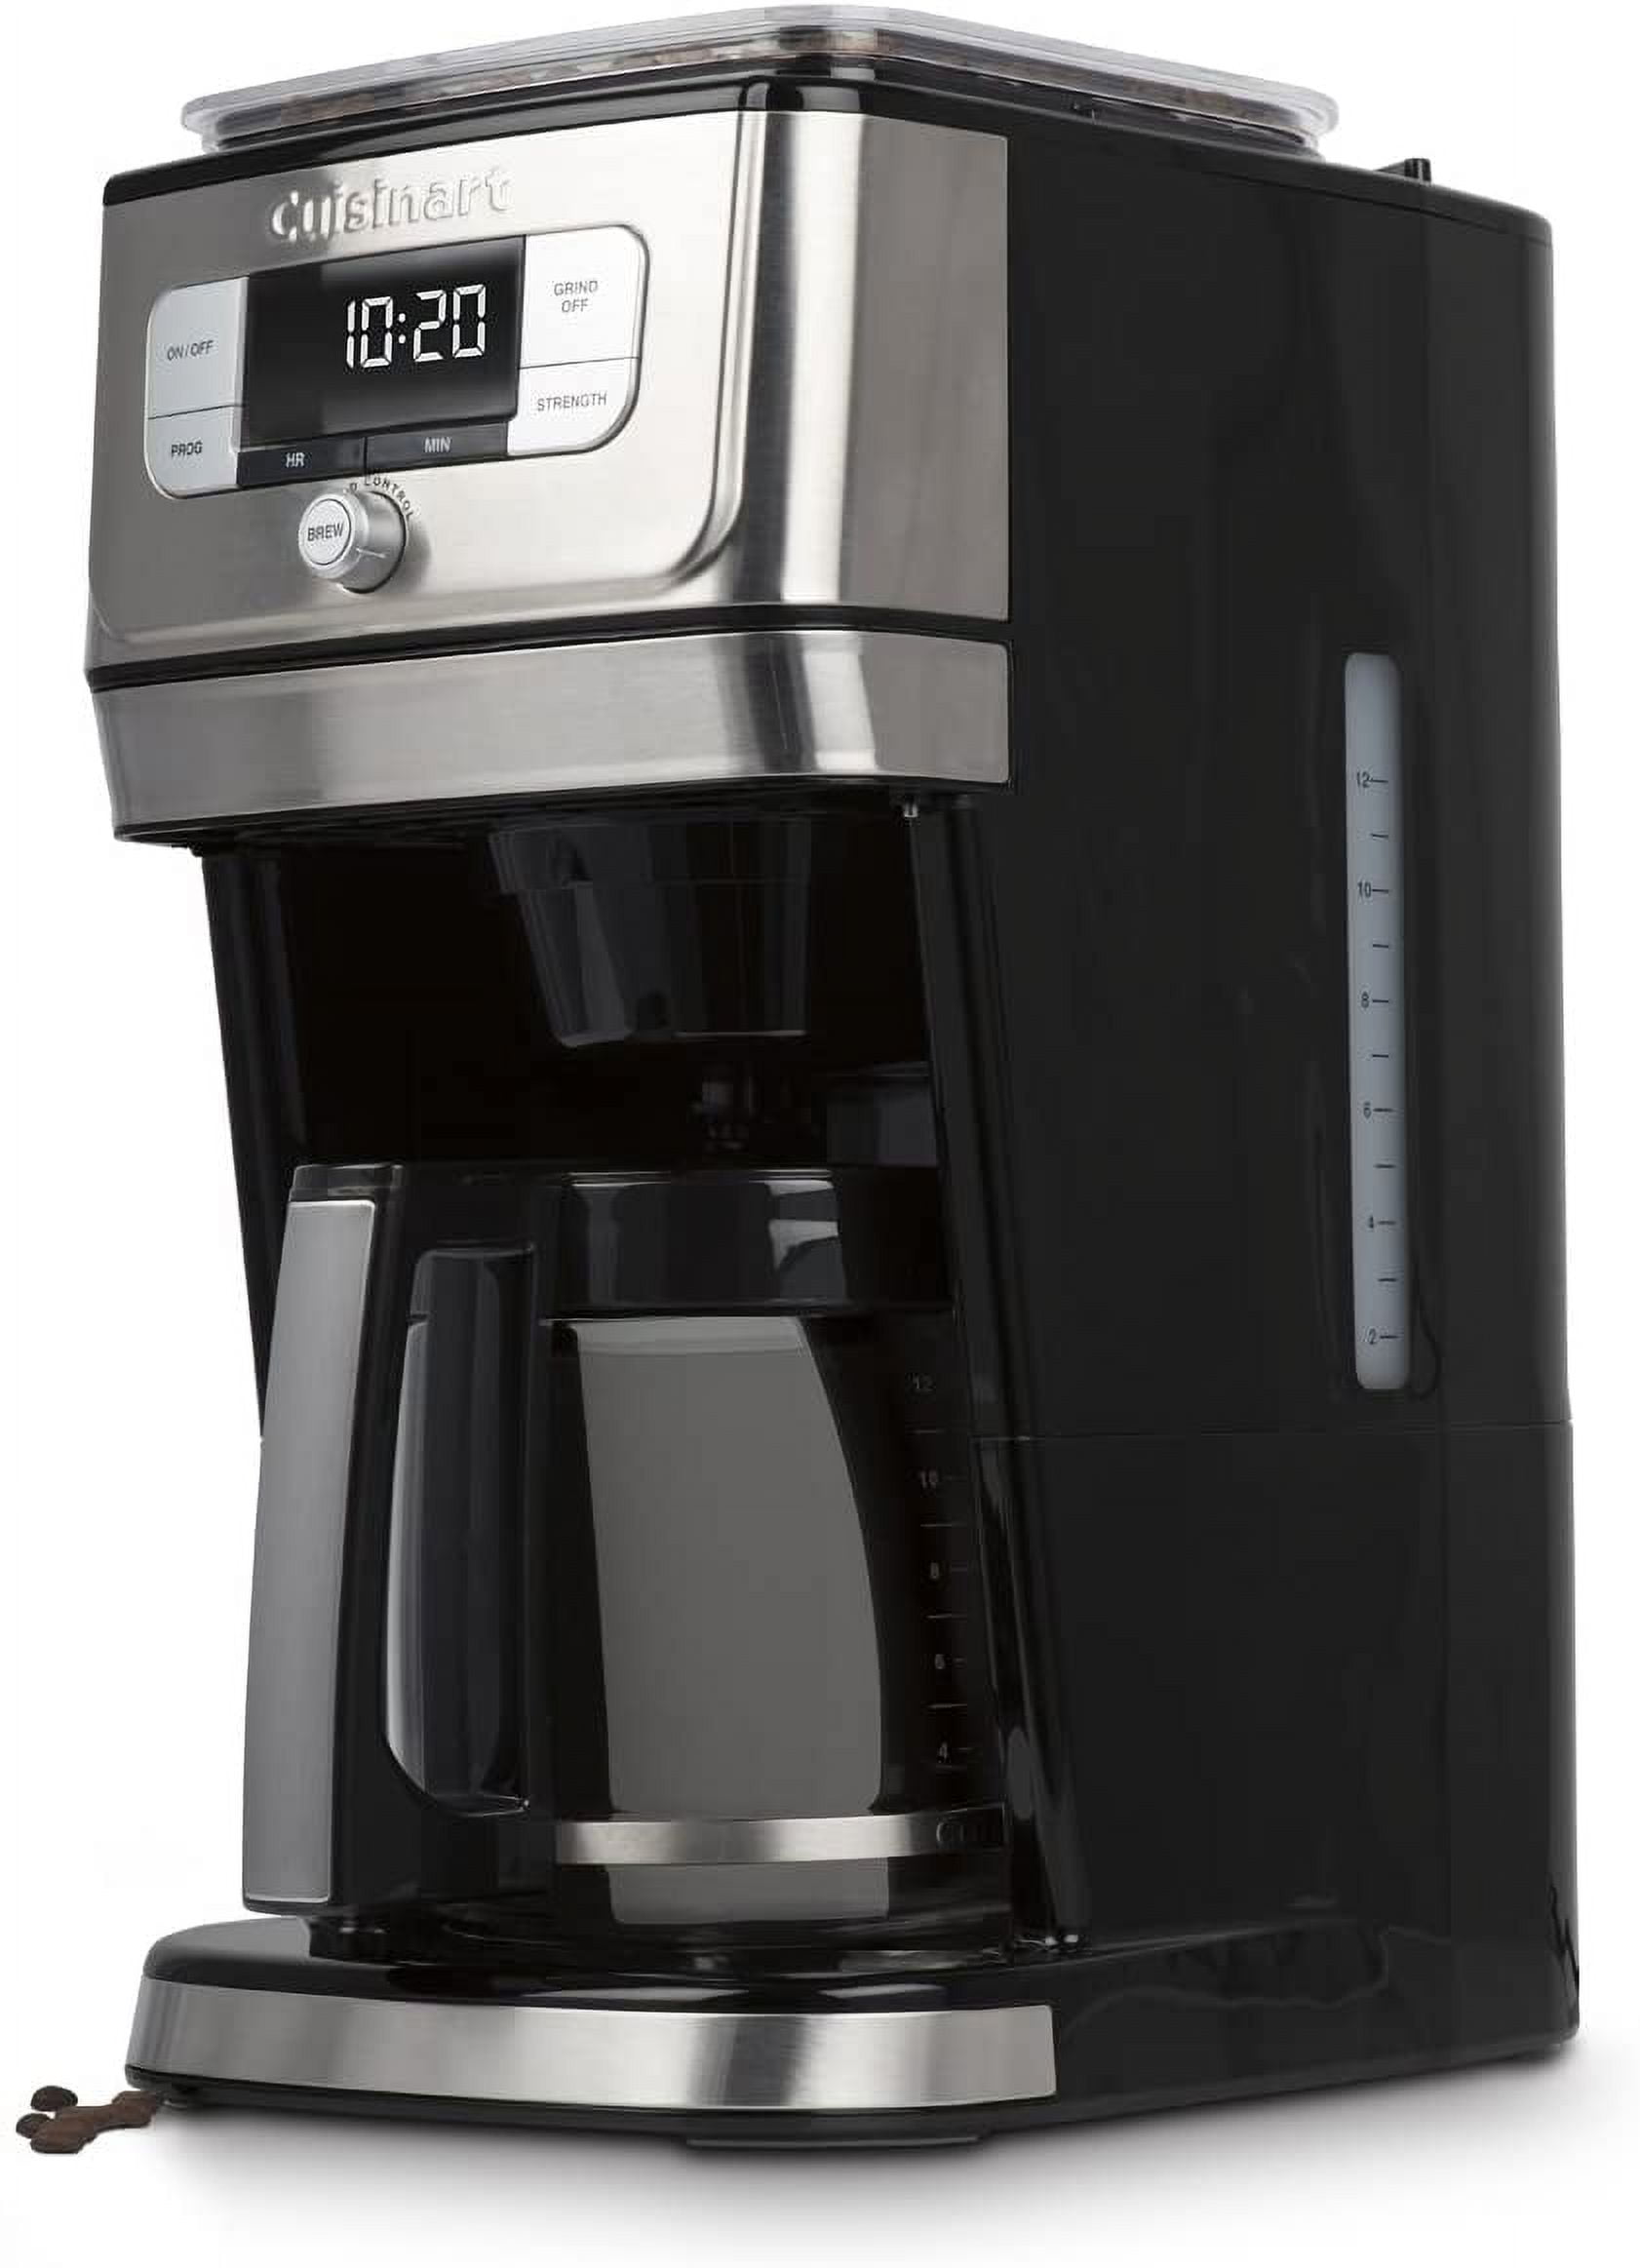 Cuisinart Coffee Grinder, Black - Shop Coffee Makers at H-E-B